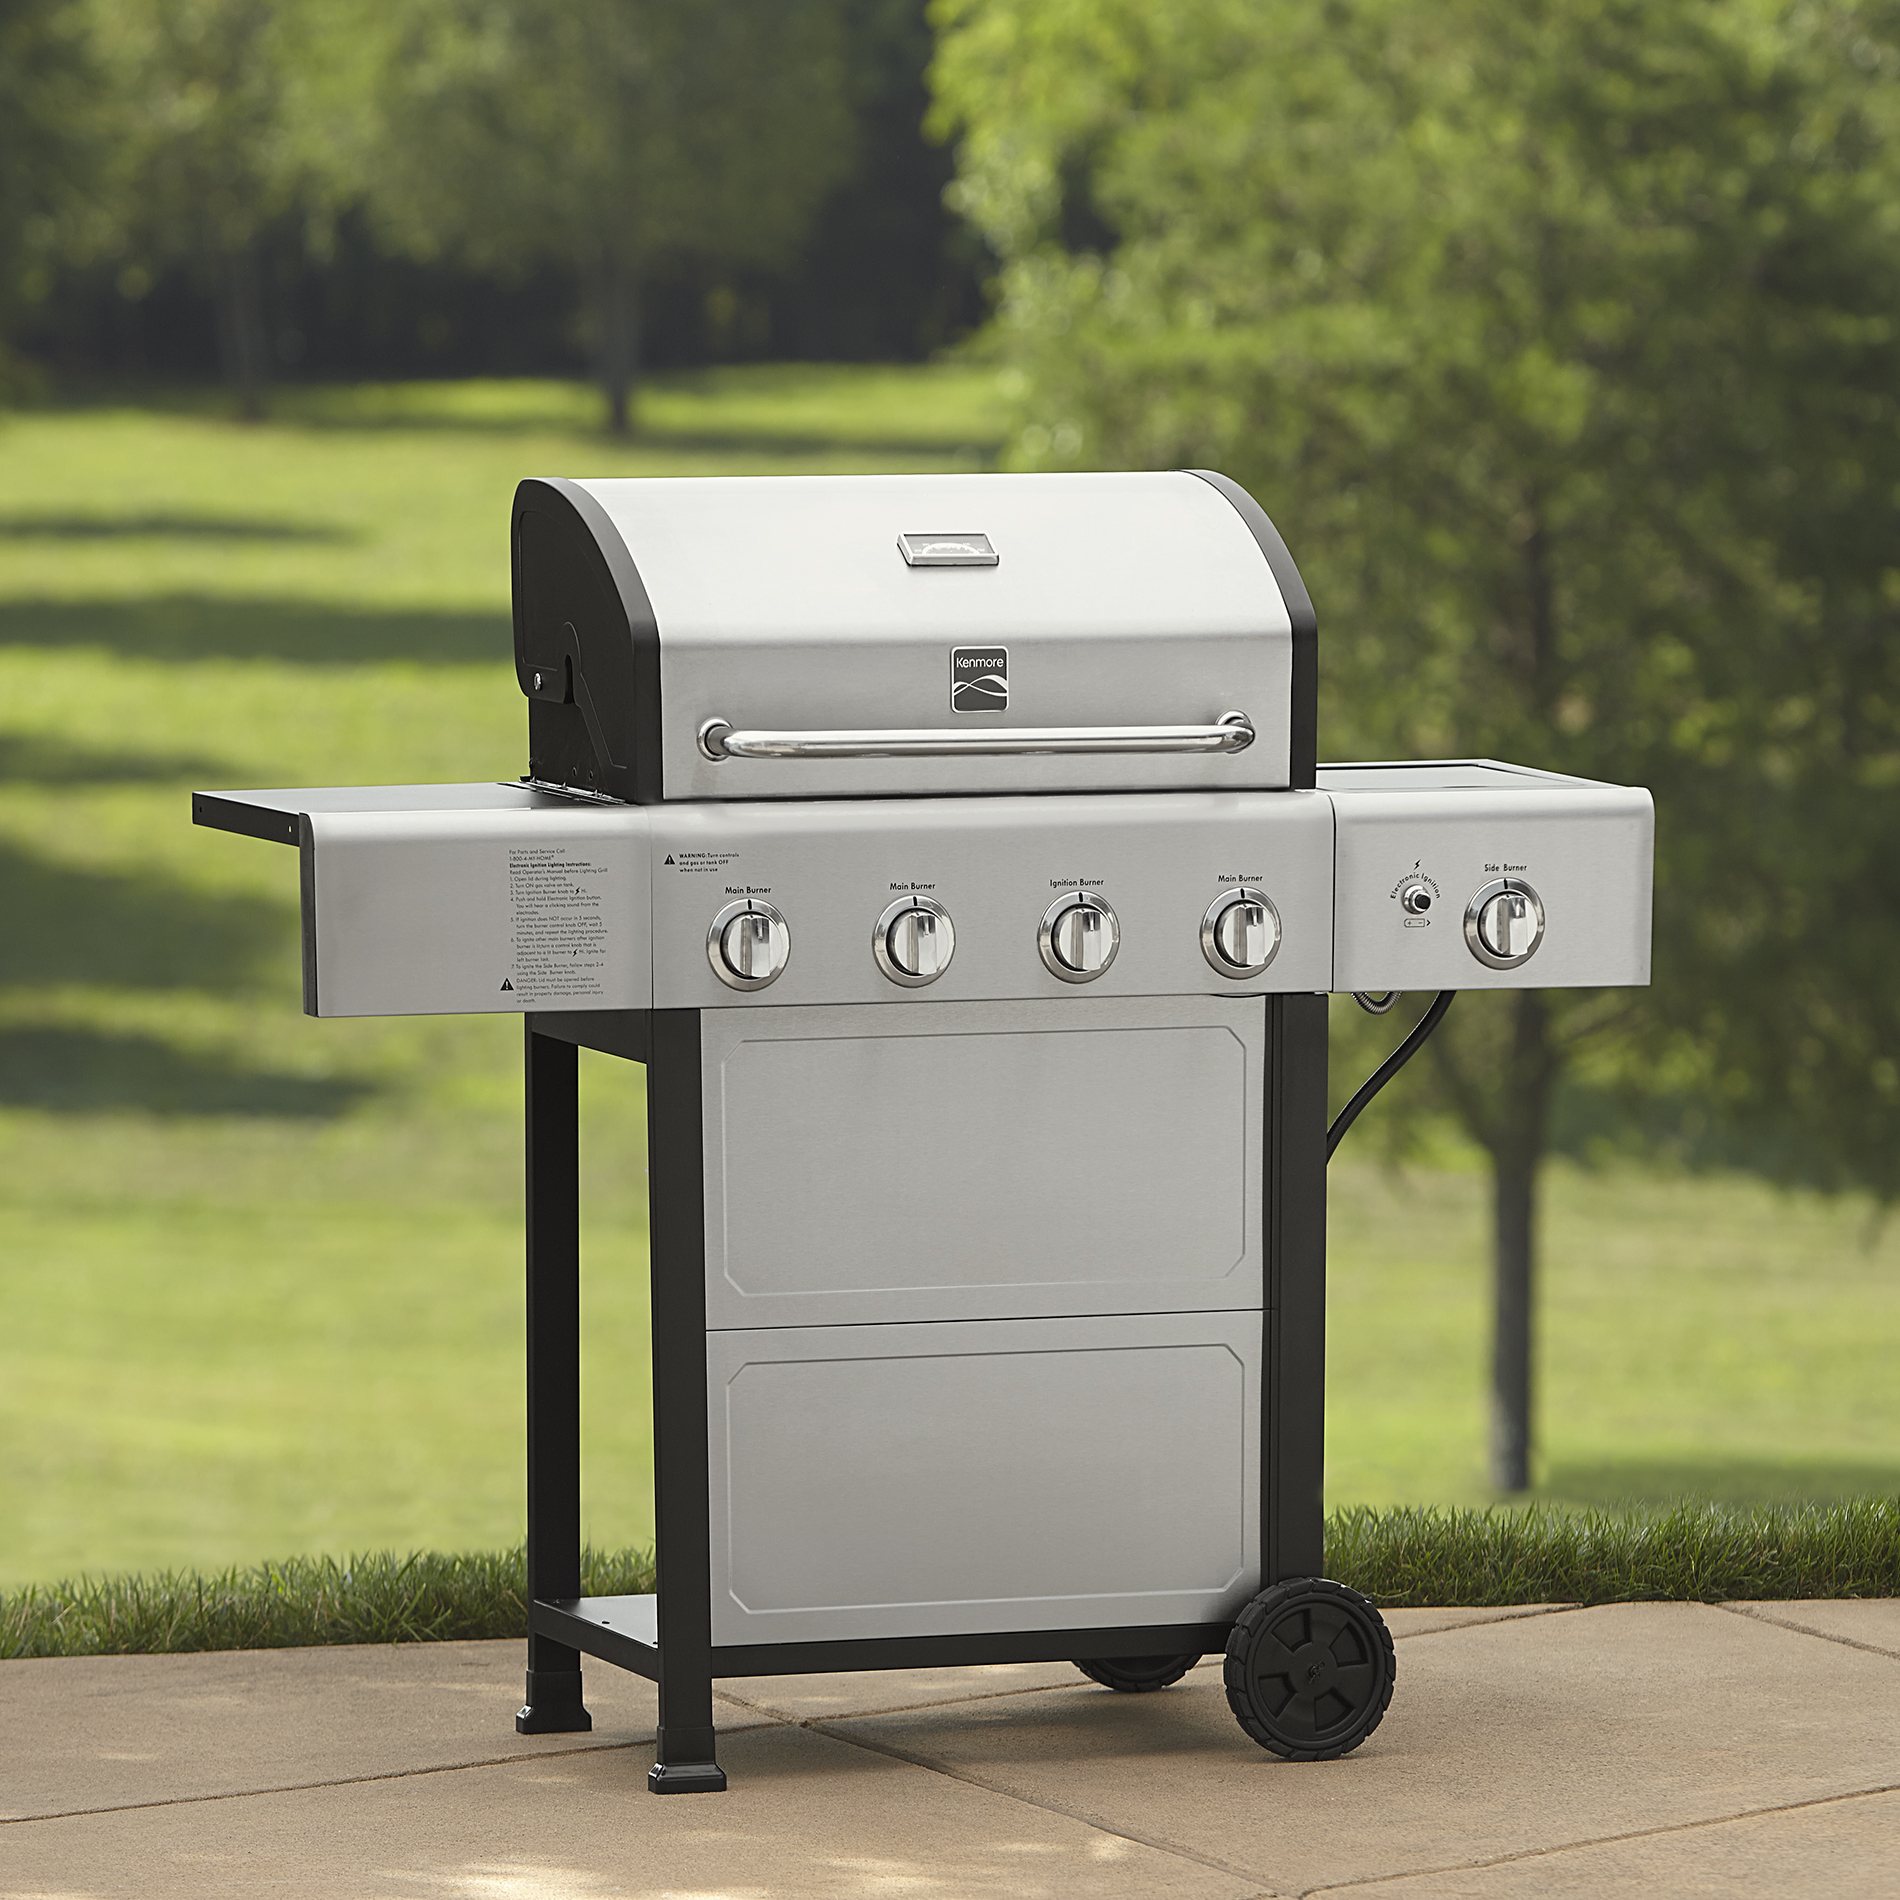 Kenmore 4 Burner Gas Grill Just $199.00 + $39.00 in SYWR Points!